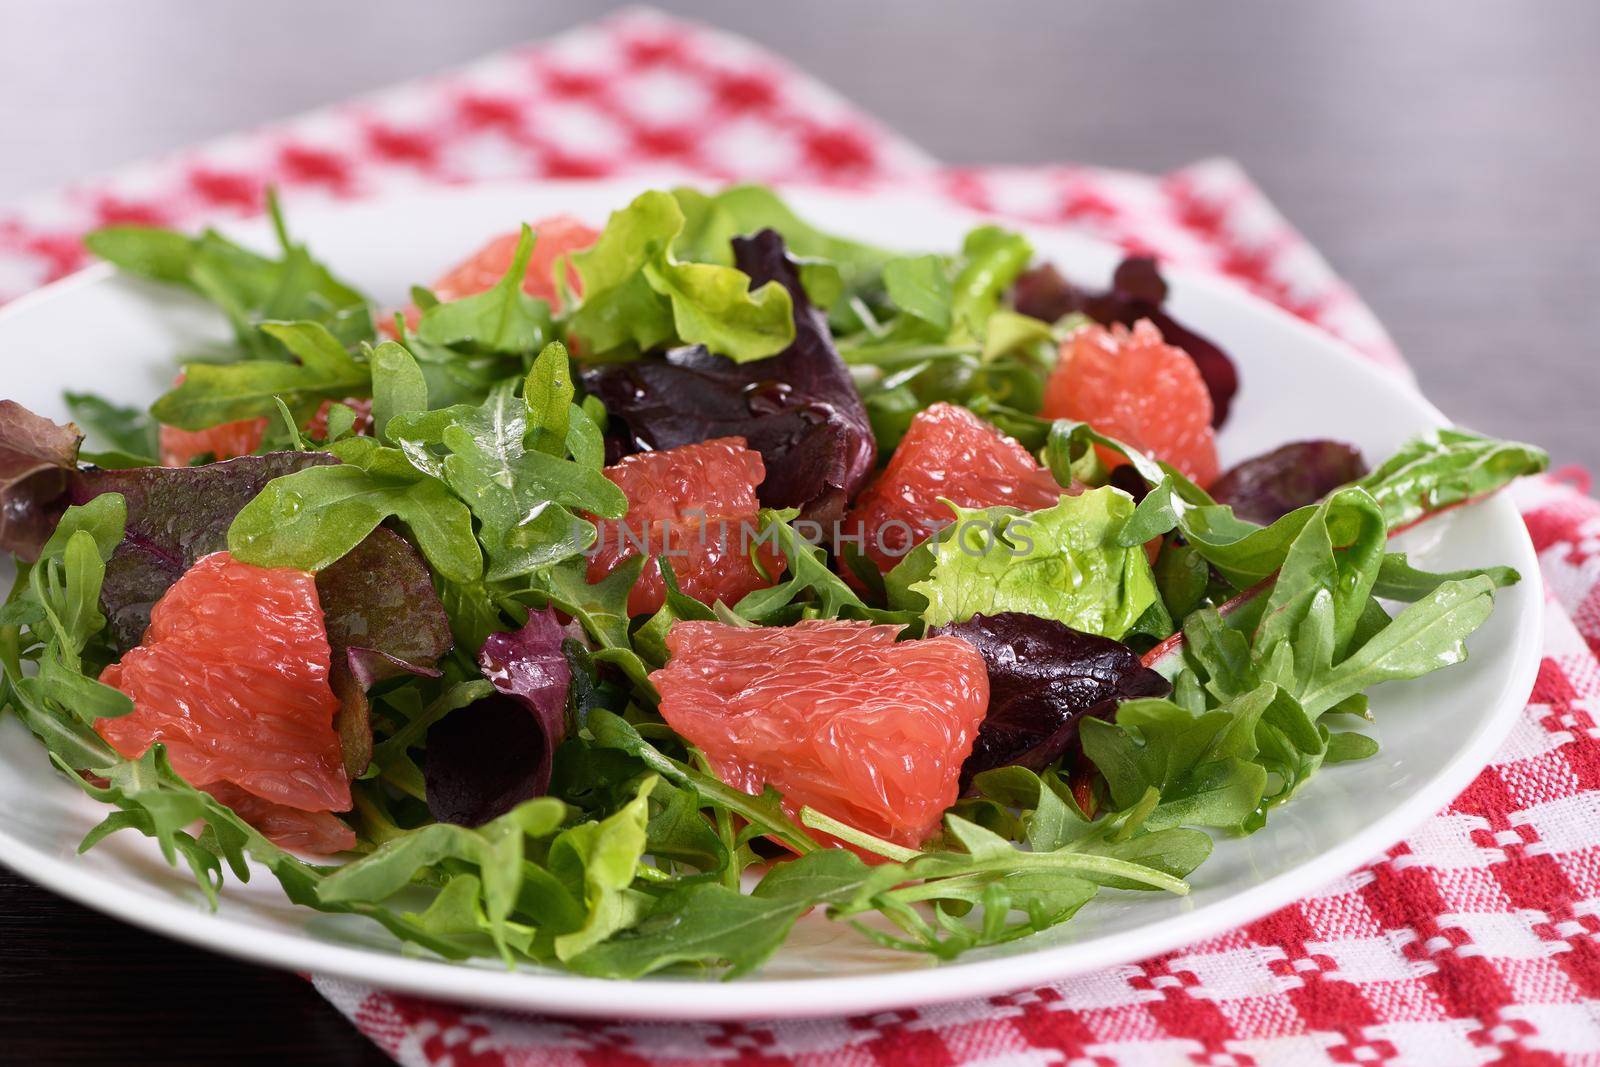 Salad from a mix of lettuce and grapefruit by Apolonia